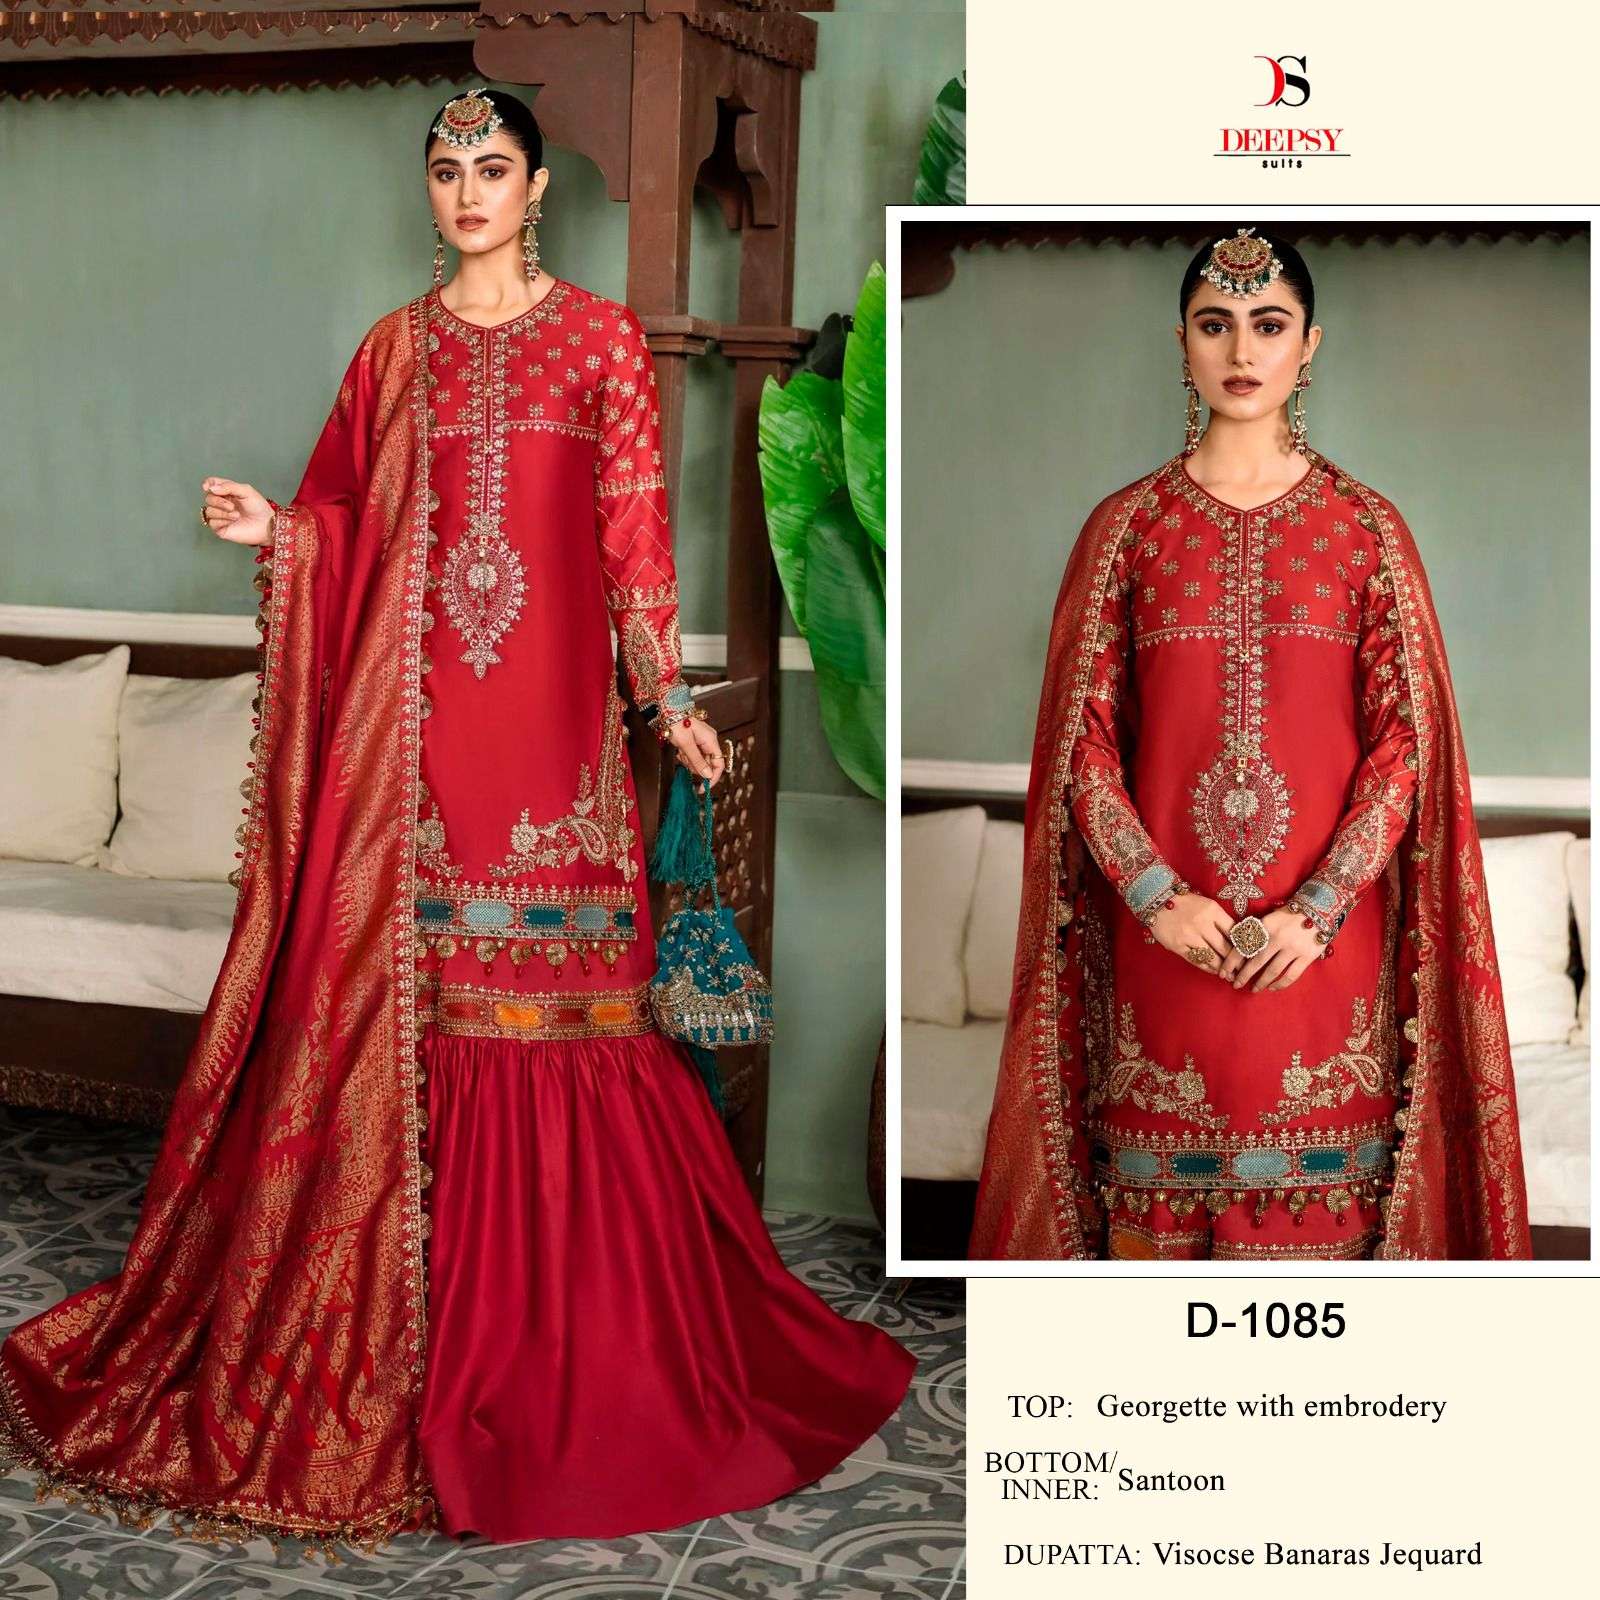 D-1085 COLOURS BY DEEPSY SUITS GEORGETTE EMBROIDERY PAKISTANI DRESS